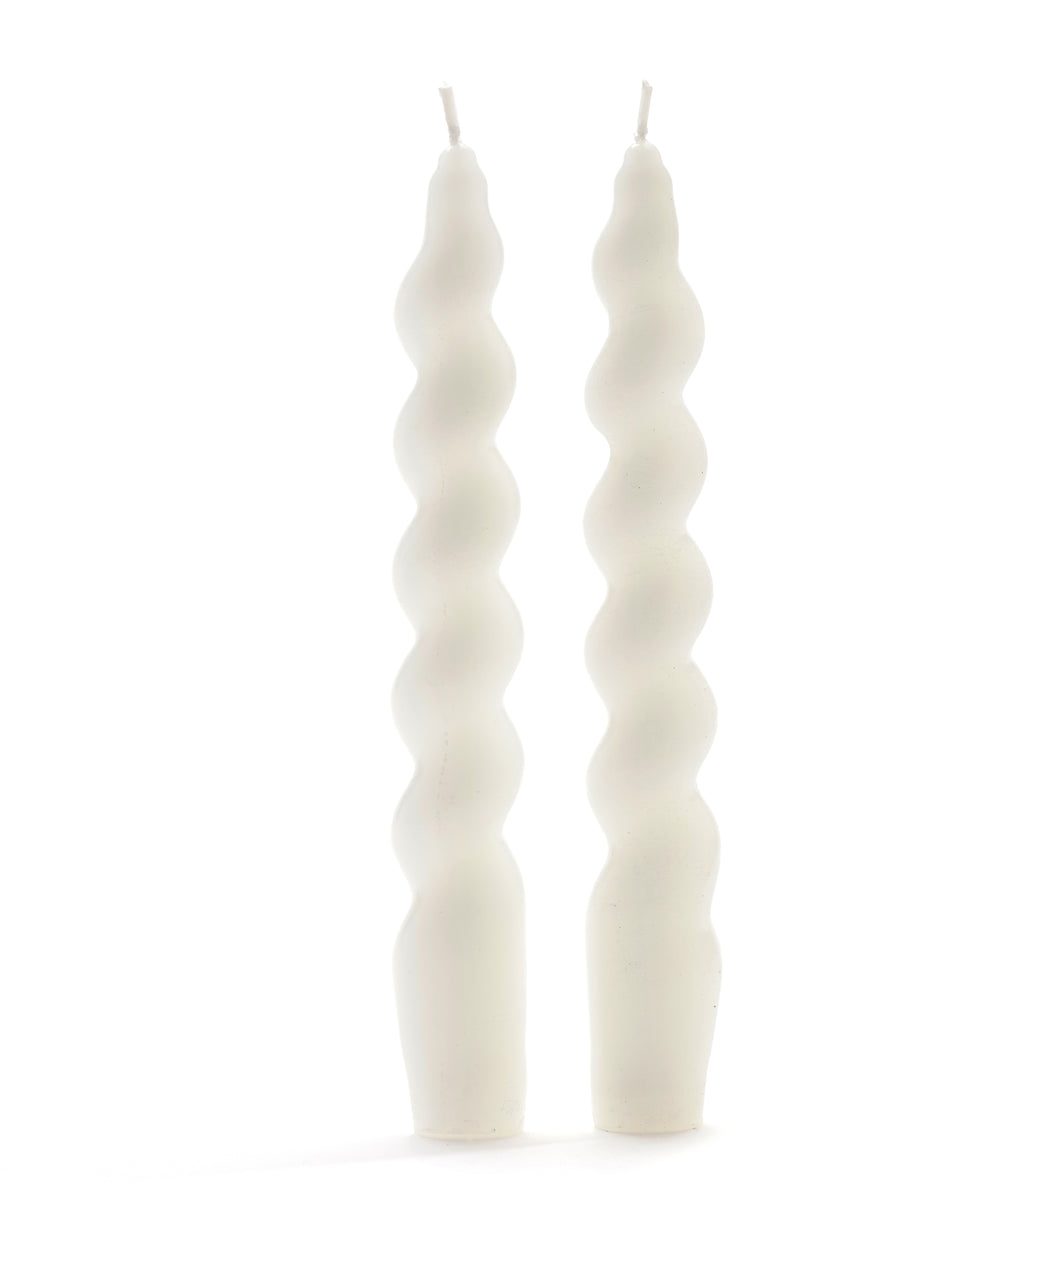 White Spiral Taper Candle Set of 2